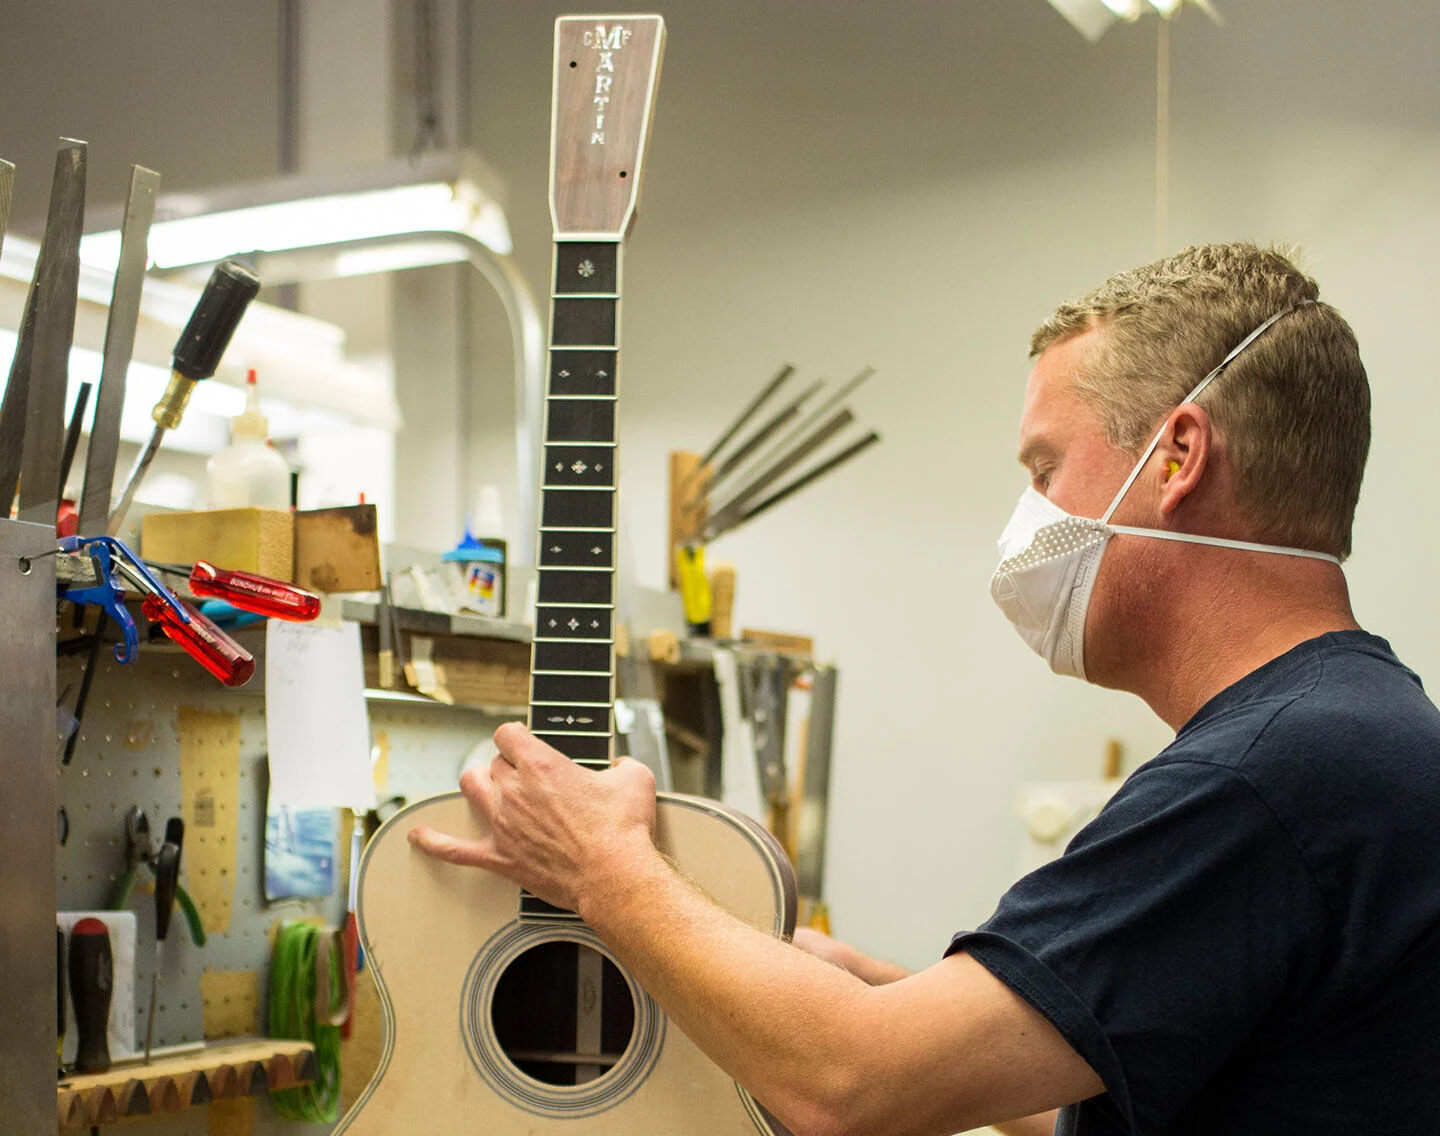 How To Make An Acoustic Guitar